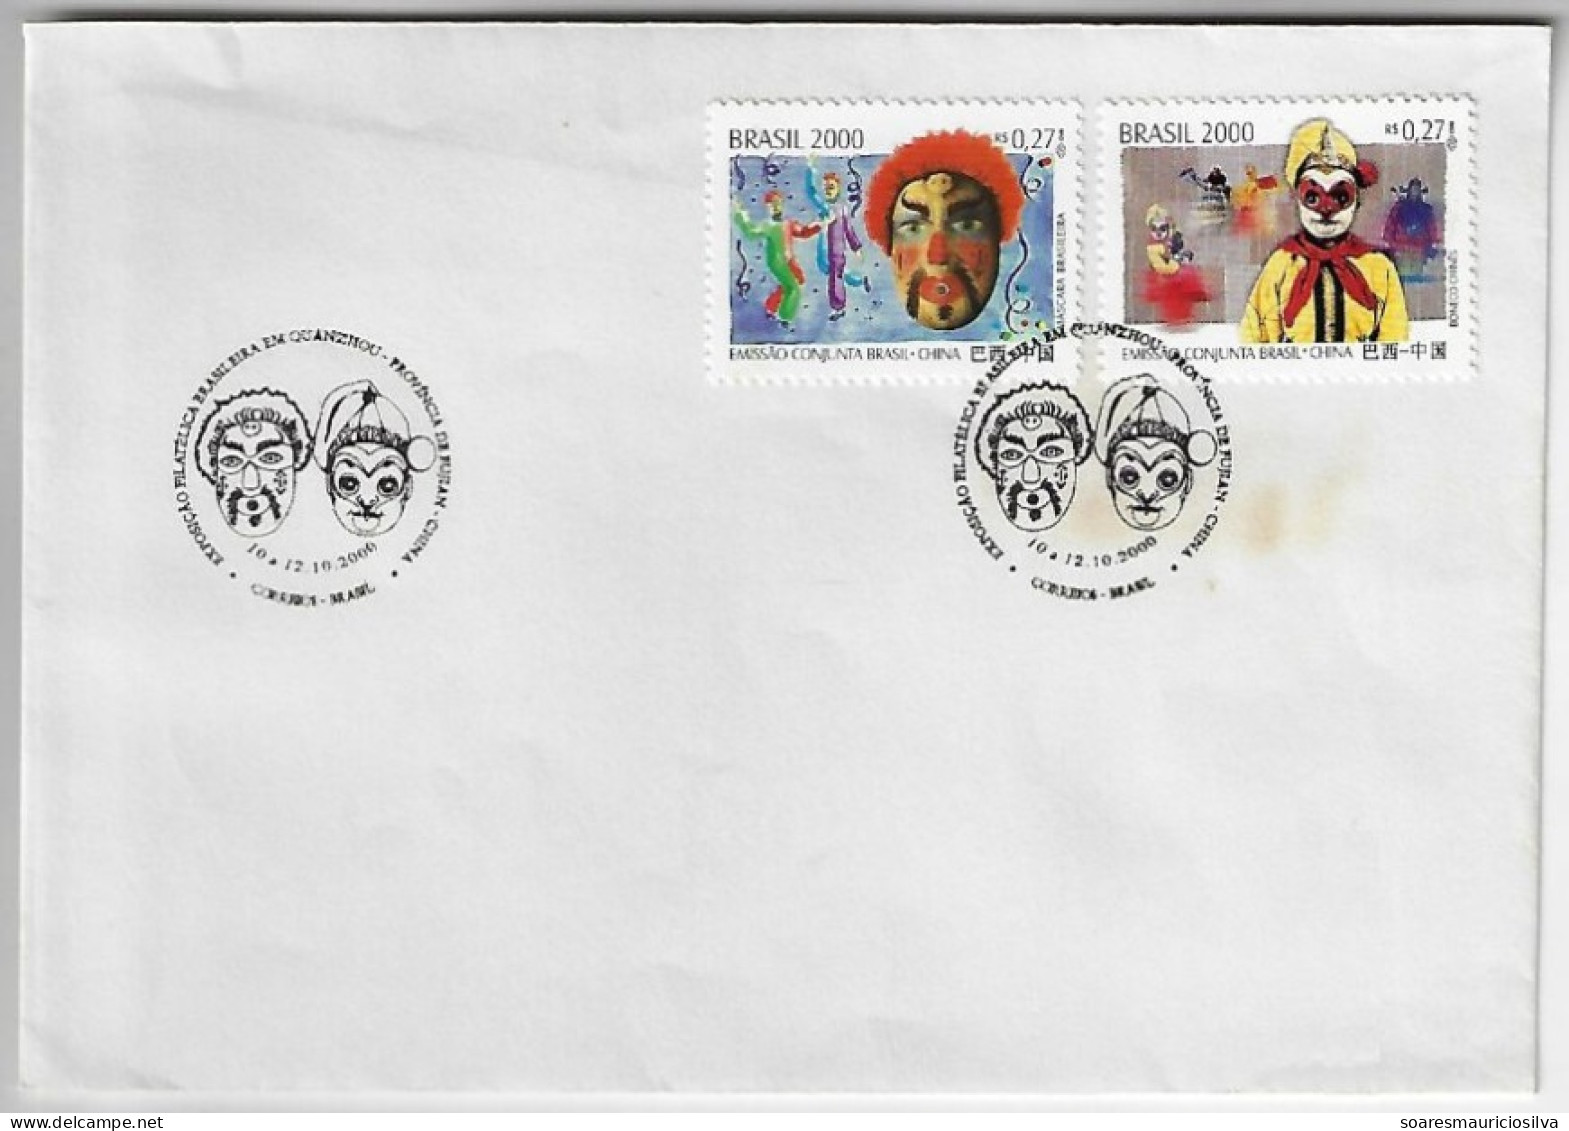 2000 2 Cover Stamp Joint Issue Brazil China 25 Years Diplomatic Relations Between Countries Brazilian Mask Chinese Doll - Briefe U. Dokumente